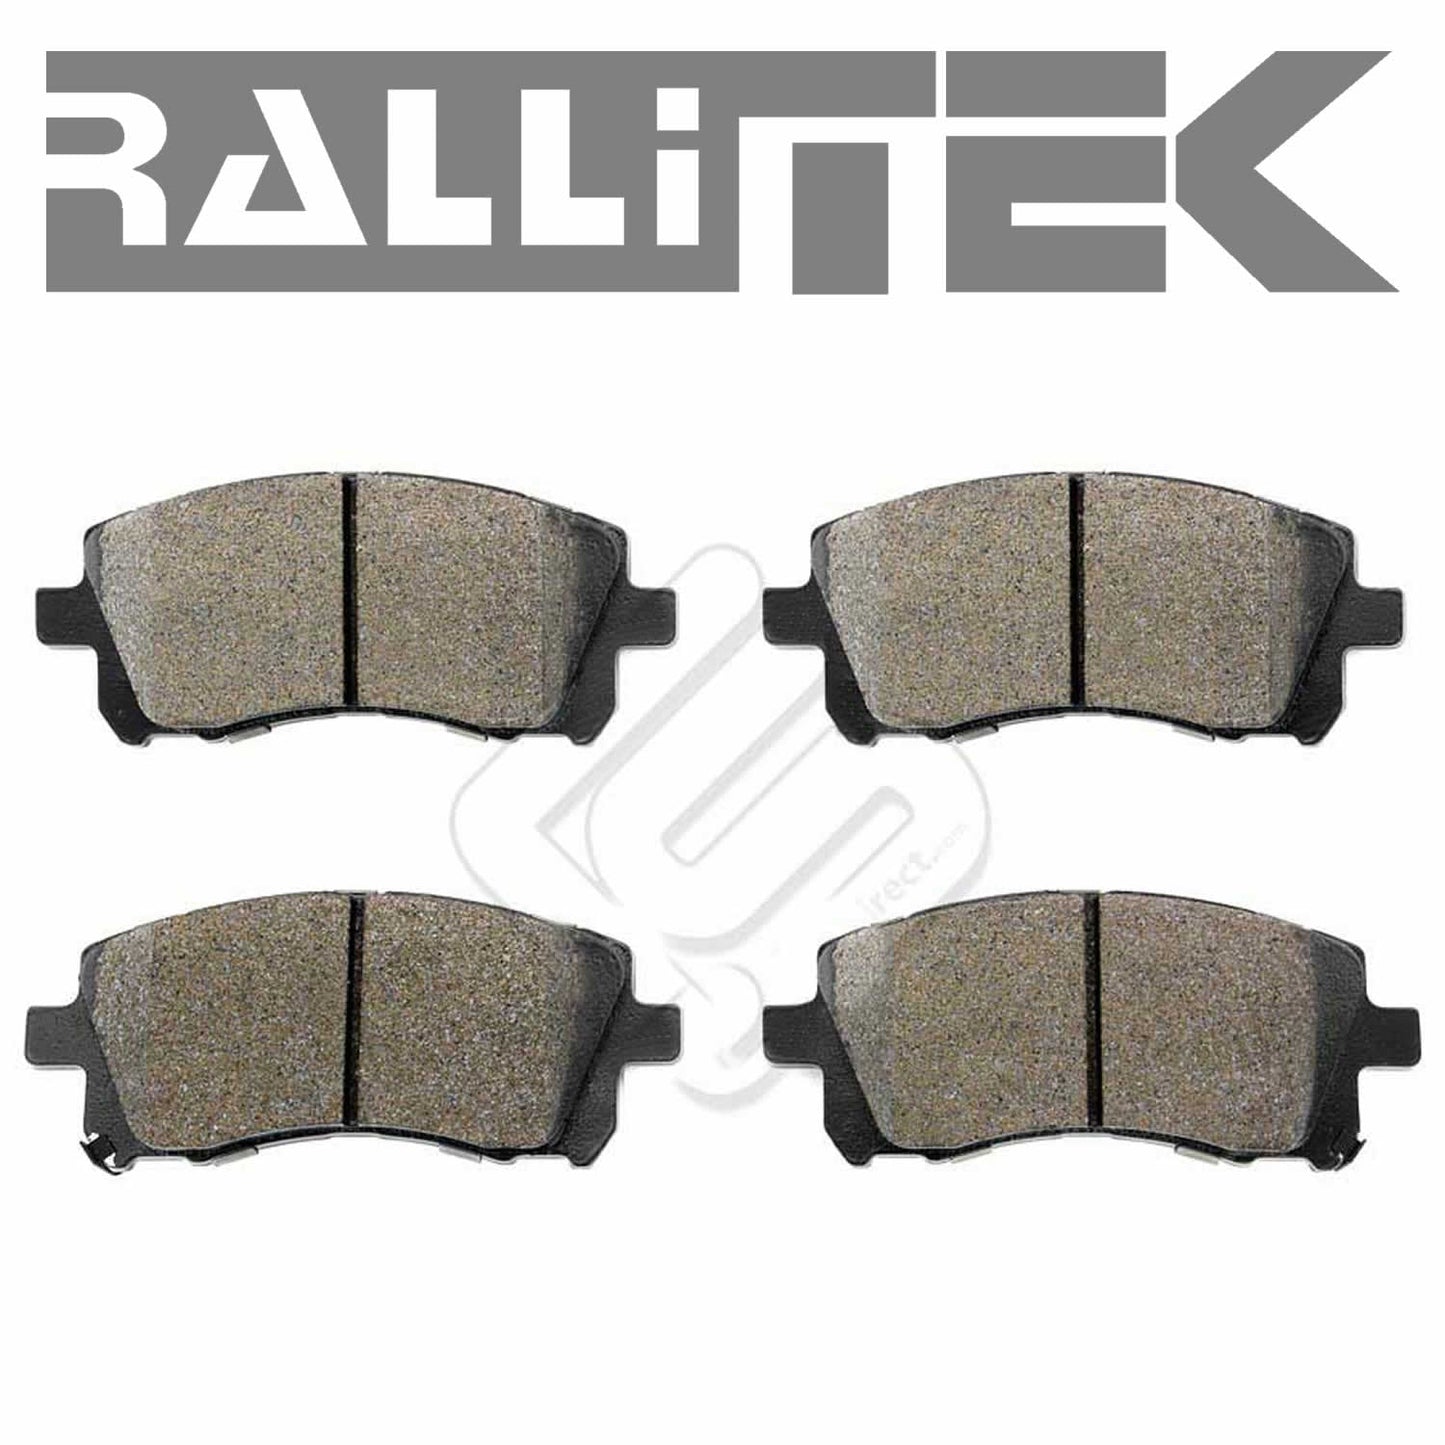 StopTech Street Performance Front Brake Pads - WRX 2002 / 2.5RS 1998-2001 / Legacy GT 1997-2002 / Forester 1998-2002 / More